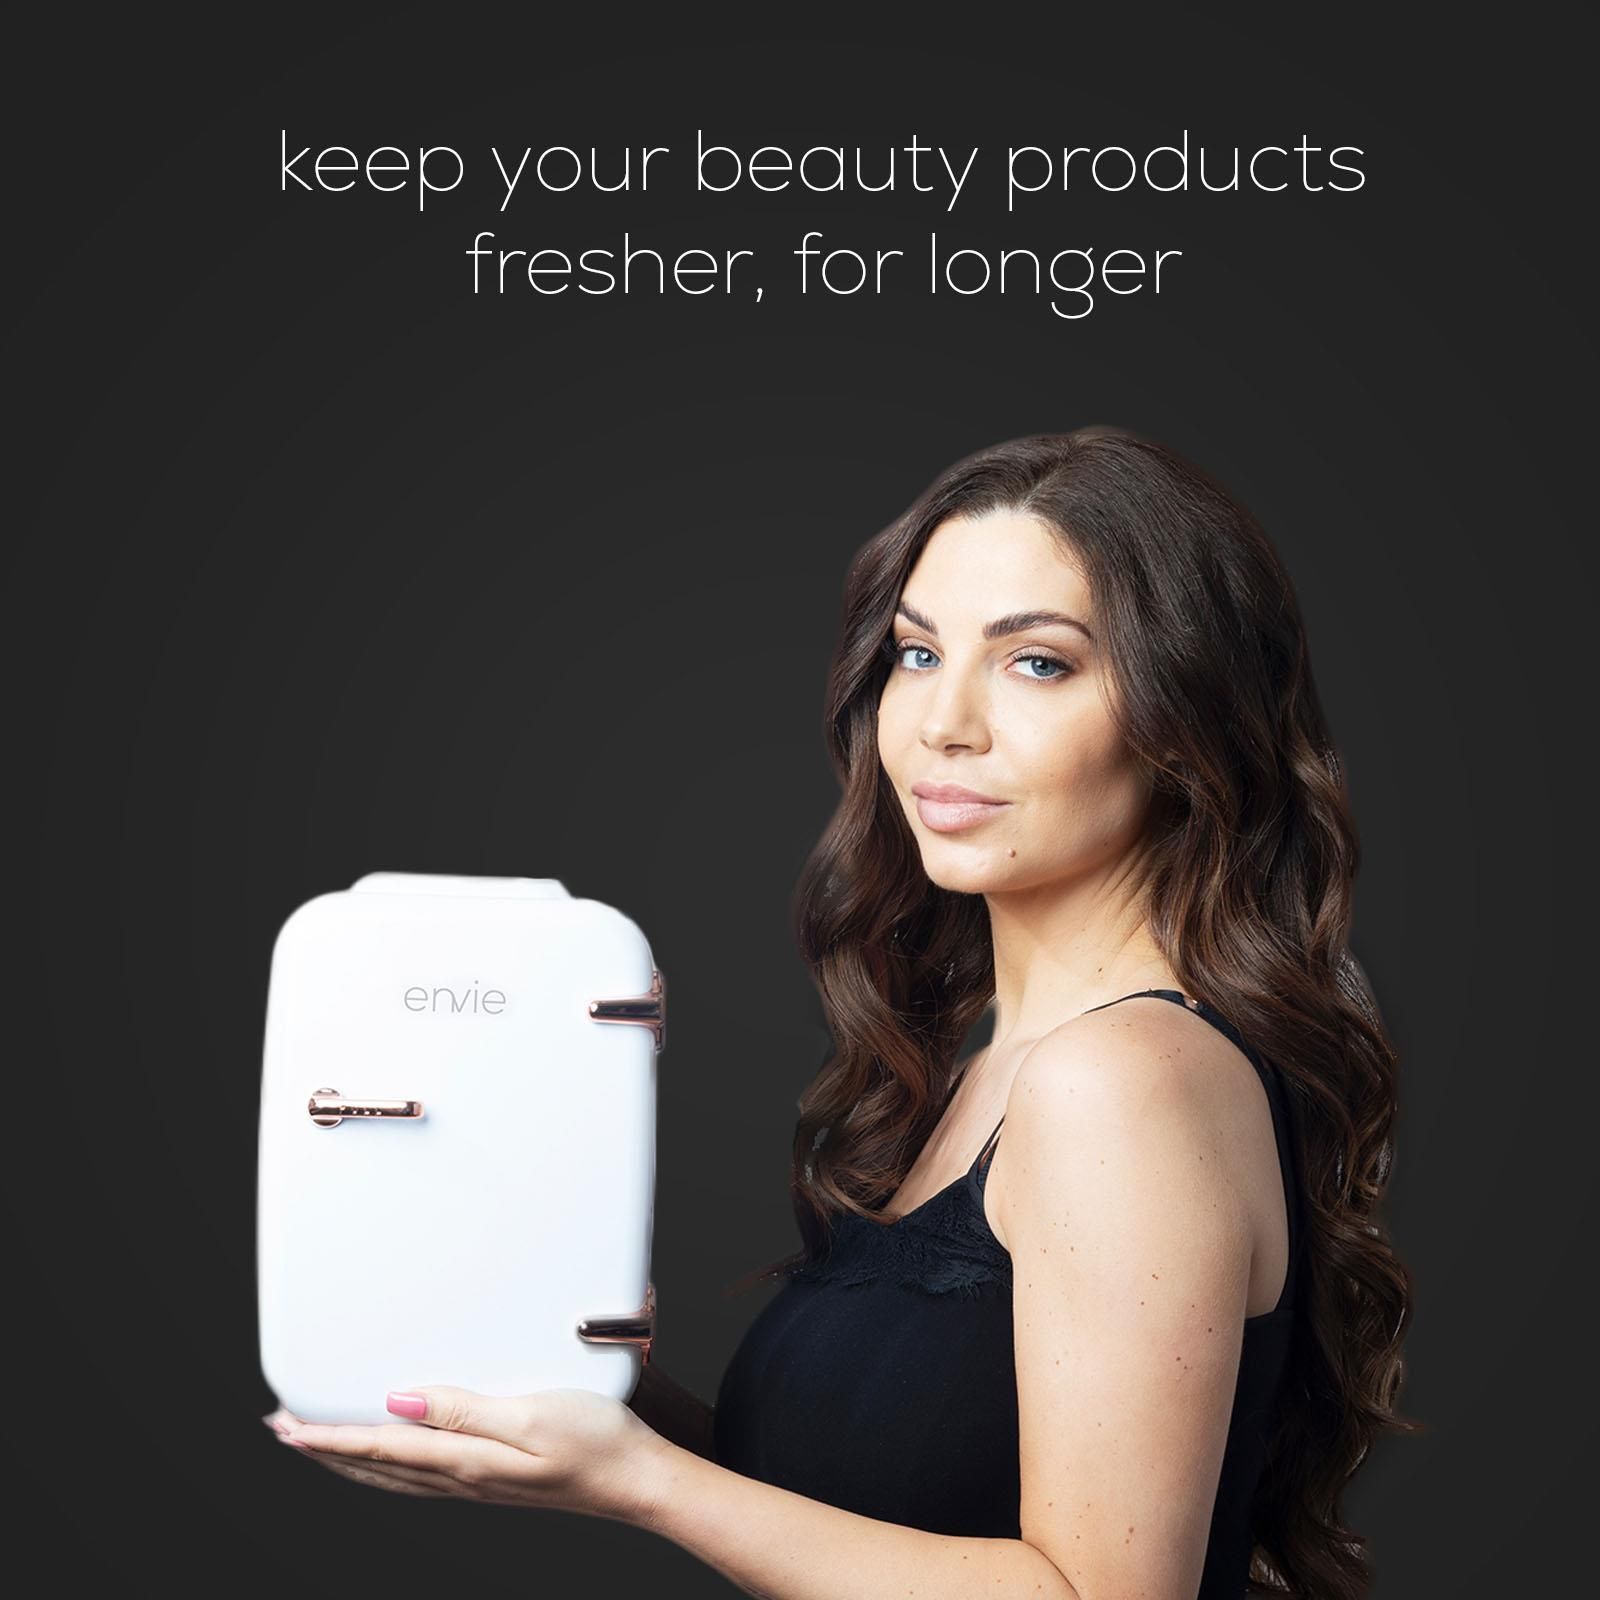 Keep your skincare and cosmetics fresher for longer with the envie Mini Beauty Fridge.  Helping to extend shelf life of your beauty products and reducing harmful bacteria, the cooling function is also ideal for maintaining cold snacks and beverages. 

Cooling products up to 20 degrees below room temperature, the fridge is sized to suit most skincare products, canned drinks and small drink cartons.

Key Features:
Removeable middle and door shelves
Thermoelectric system switches from cooling to warming
Warming function ideal for maintaining warm snacks and hot drinks
Suitable for bedrooms, office, camping, cars, caravans, boats
Stash your treats – perfect for student rooms and offices.  Keep your personal stash away from the hands of others!
Can hold up to 4 litres